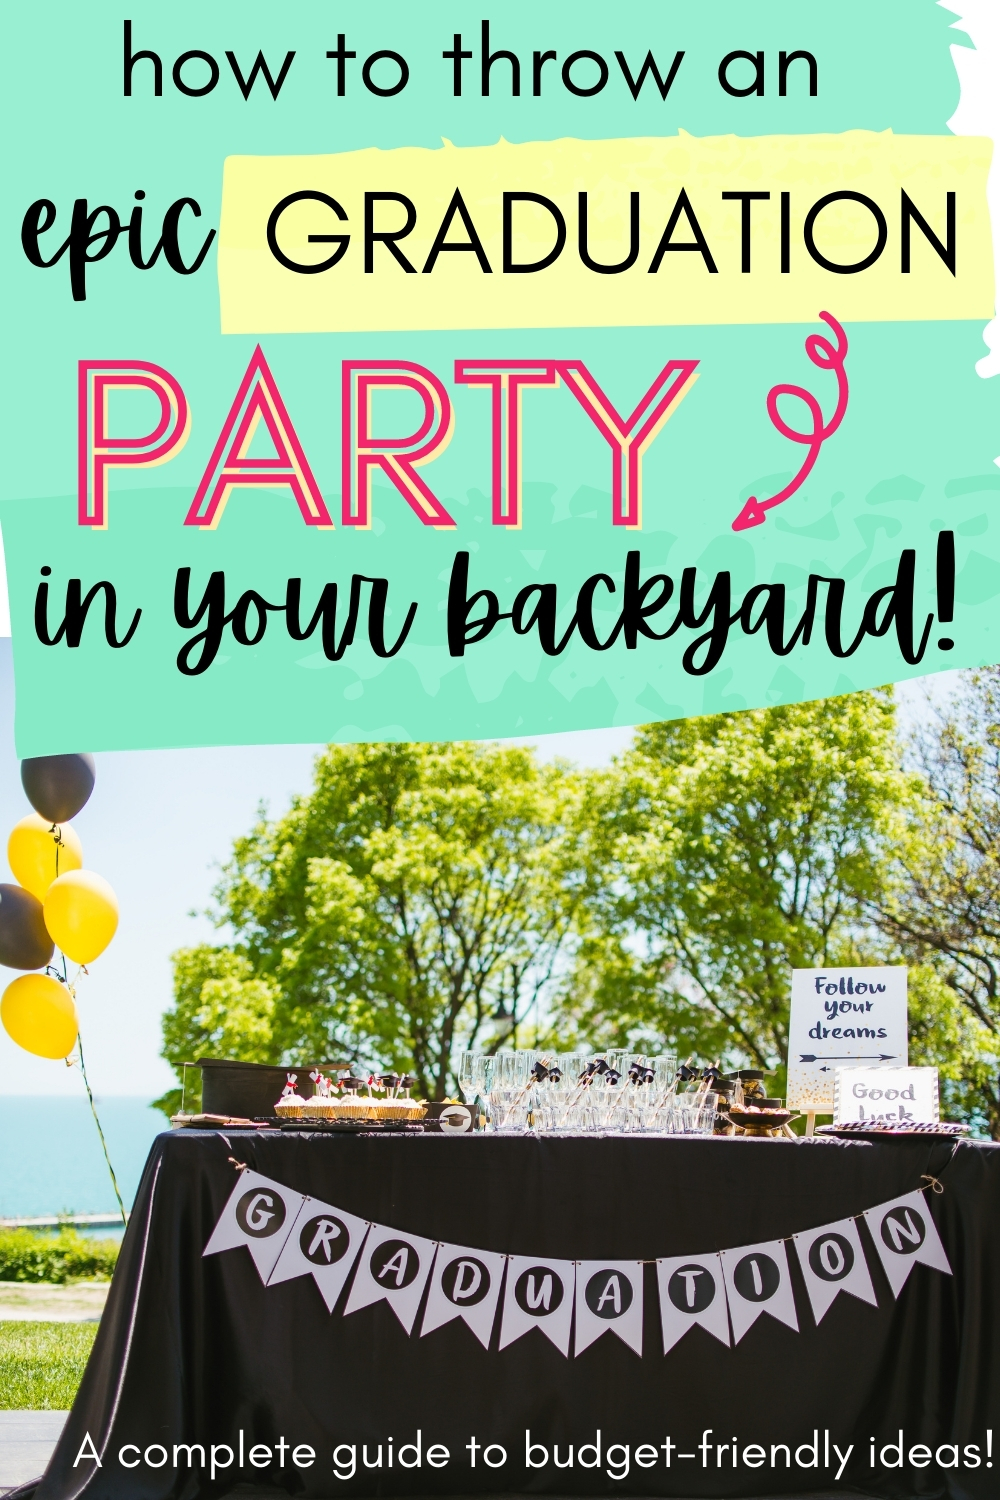 80 Epic Outdoor Backyard Graduation Party Ideas (on a Budget!)